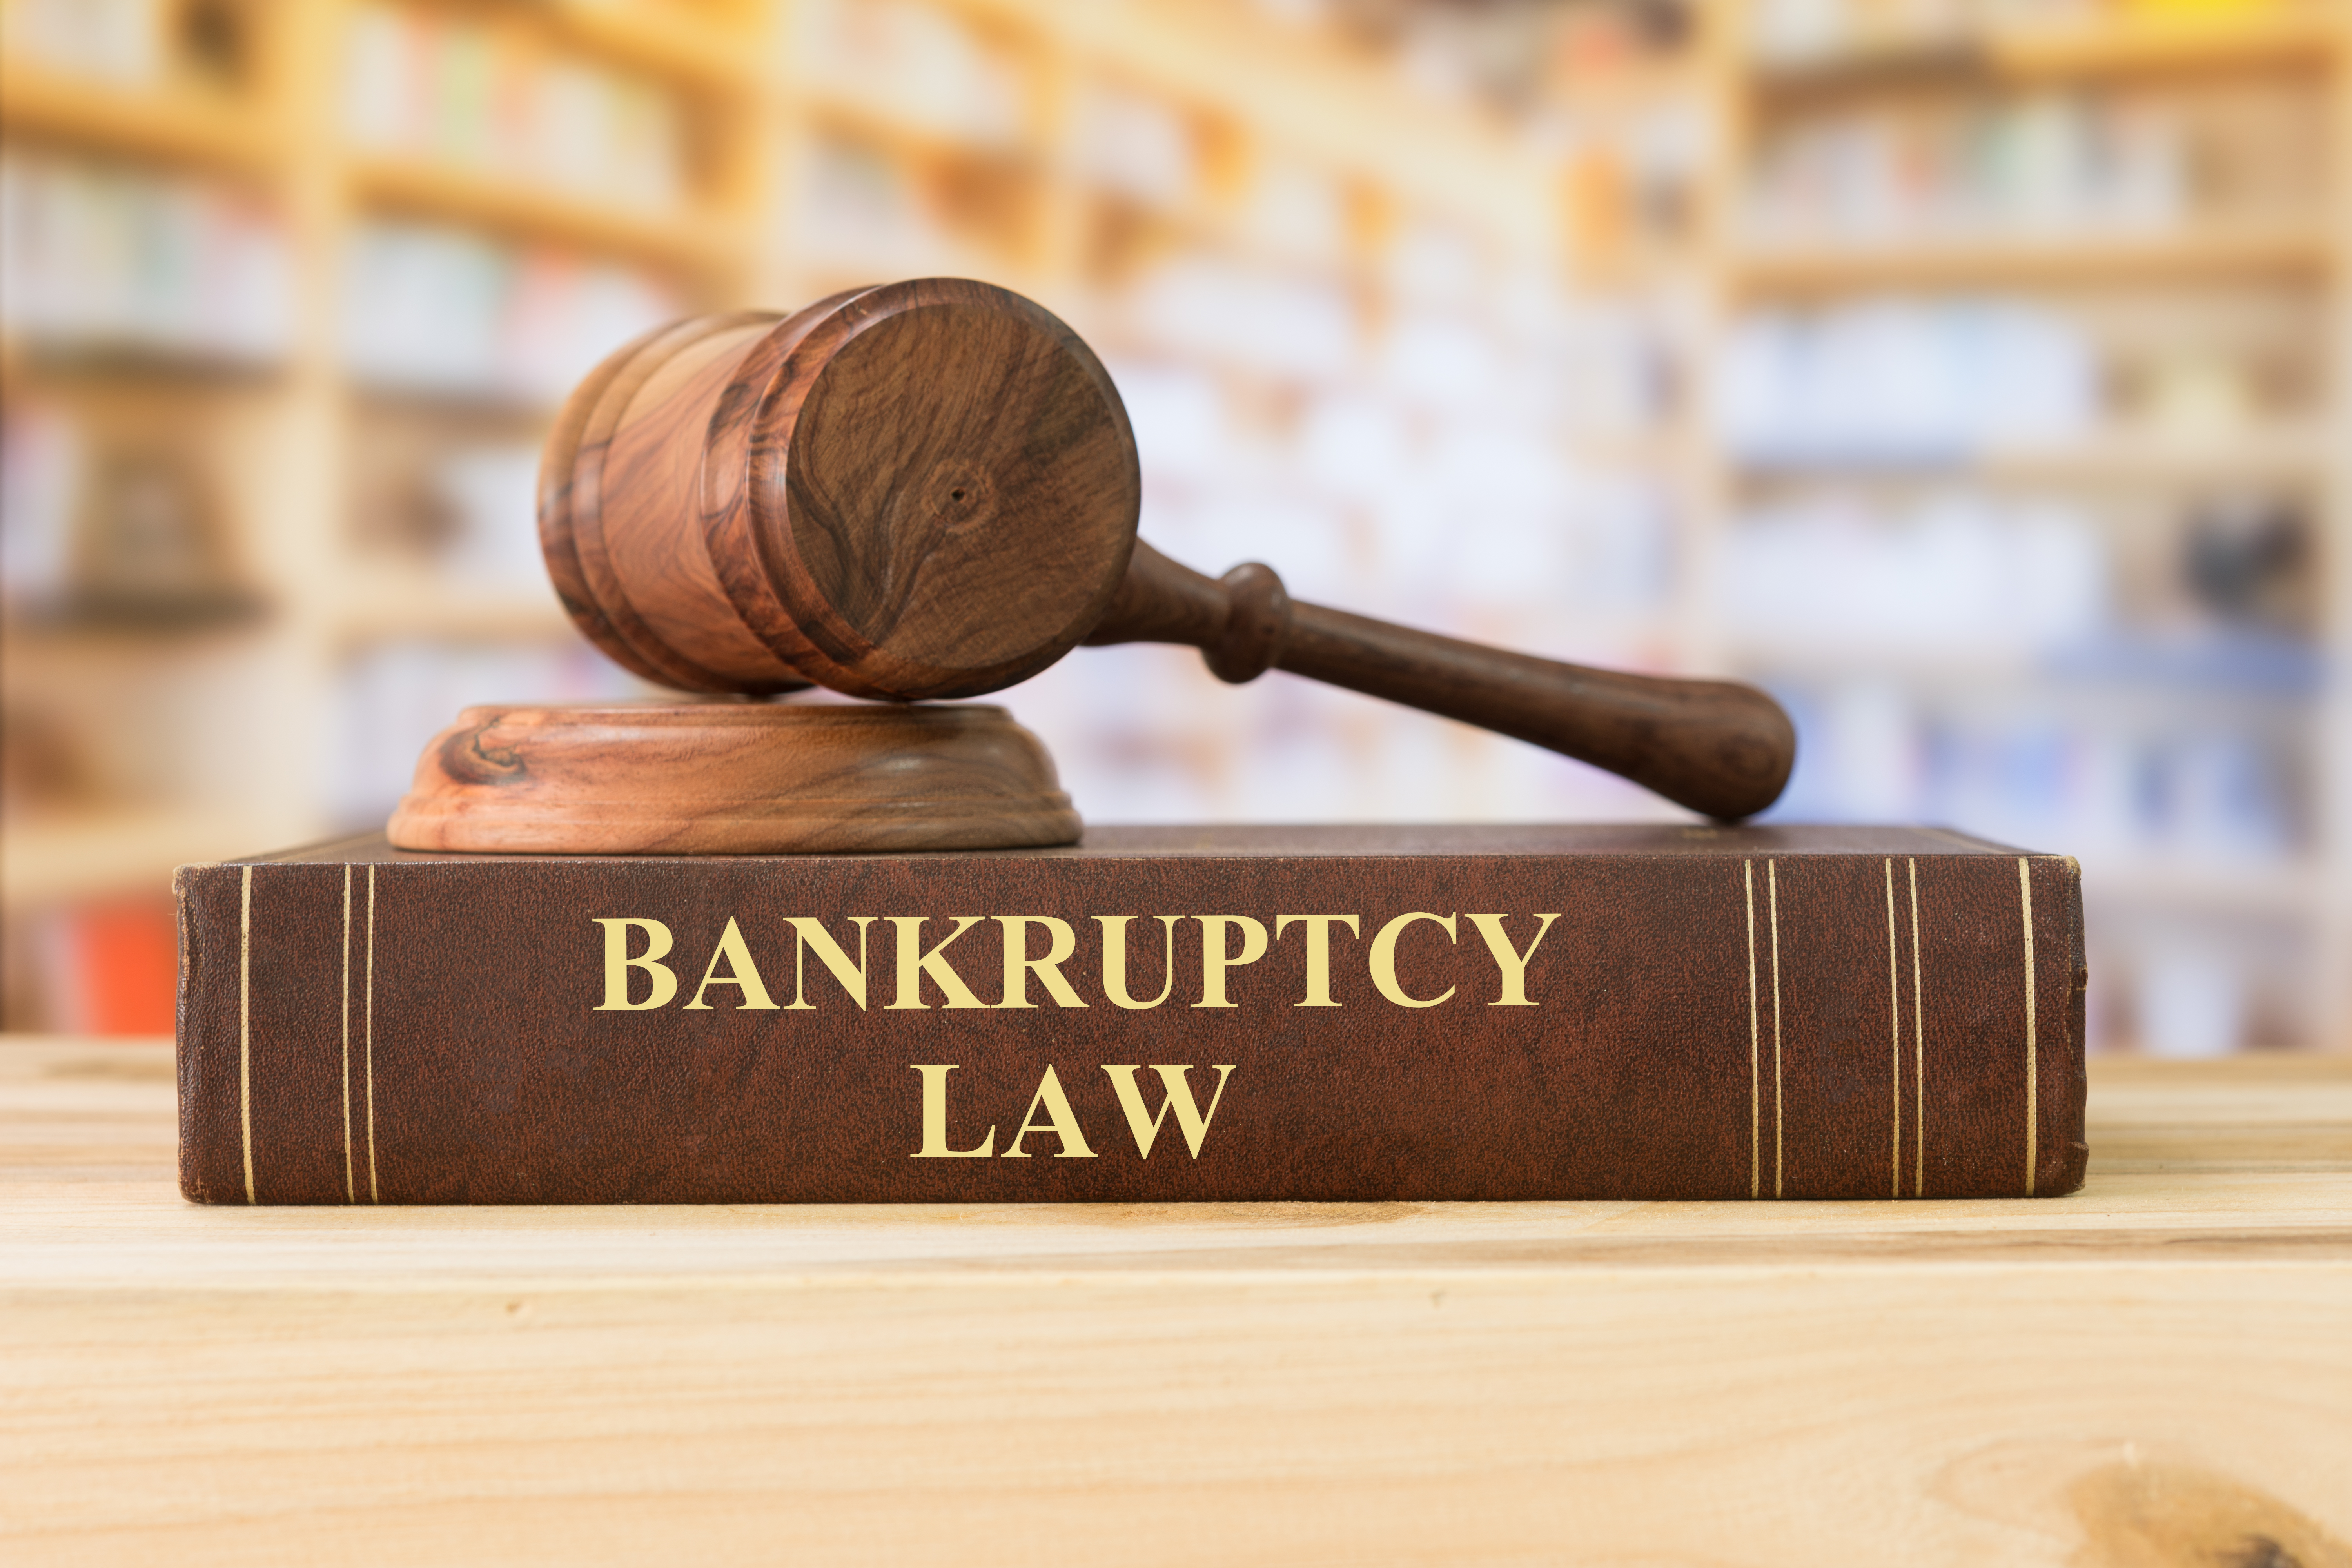 Nevada Bankruptcy Attorneys Price Law Group Ch 13 and Ch 7 866-210-1722